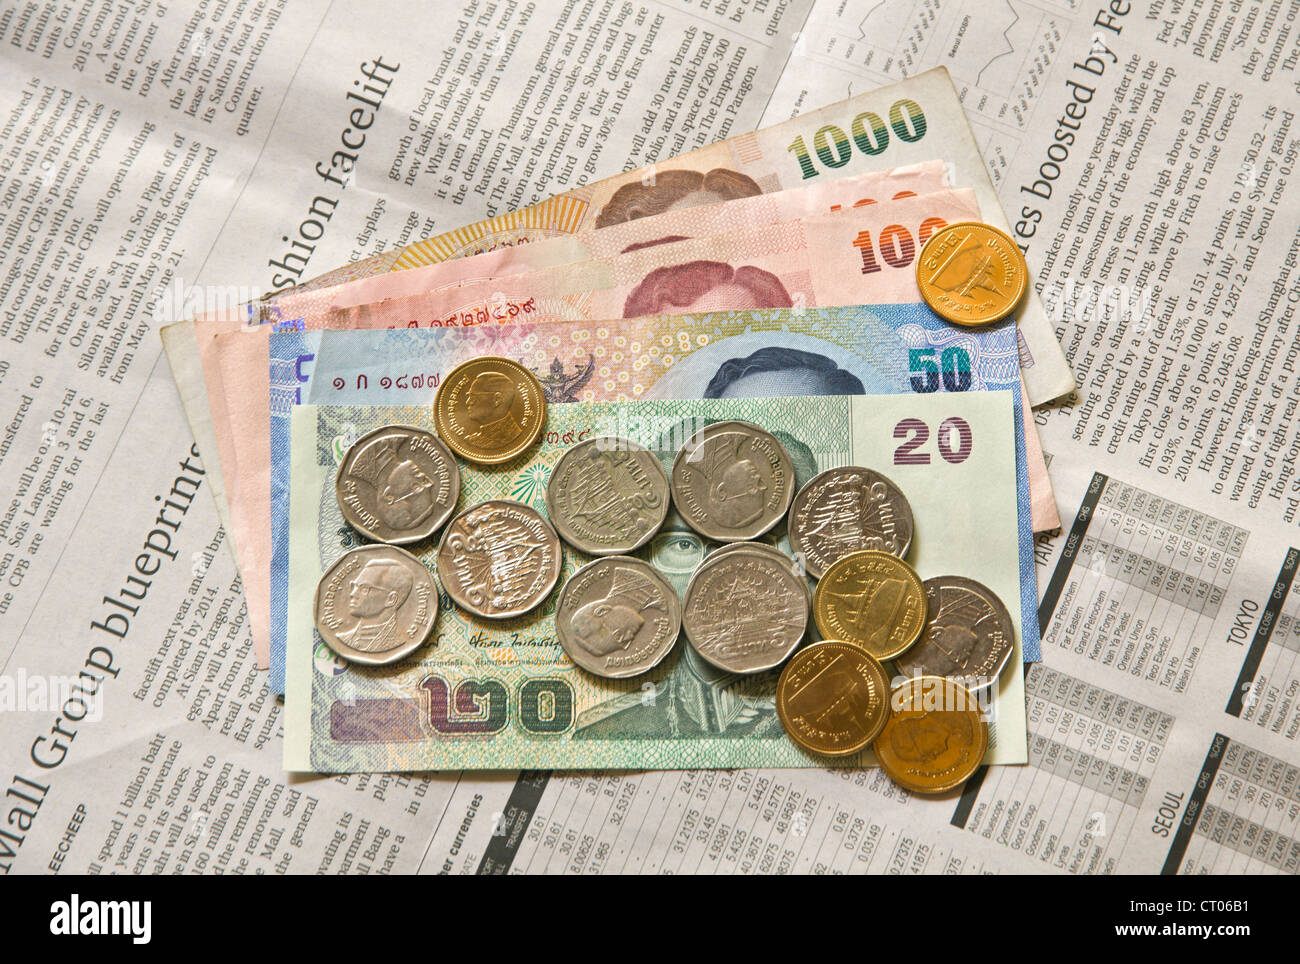 Thailand's Baht currency, Notes and coins on English Newspaper Stock Photo